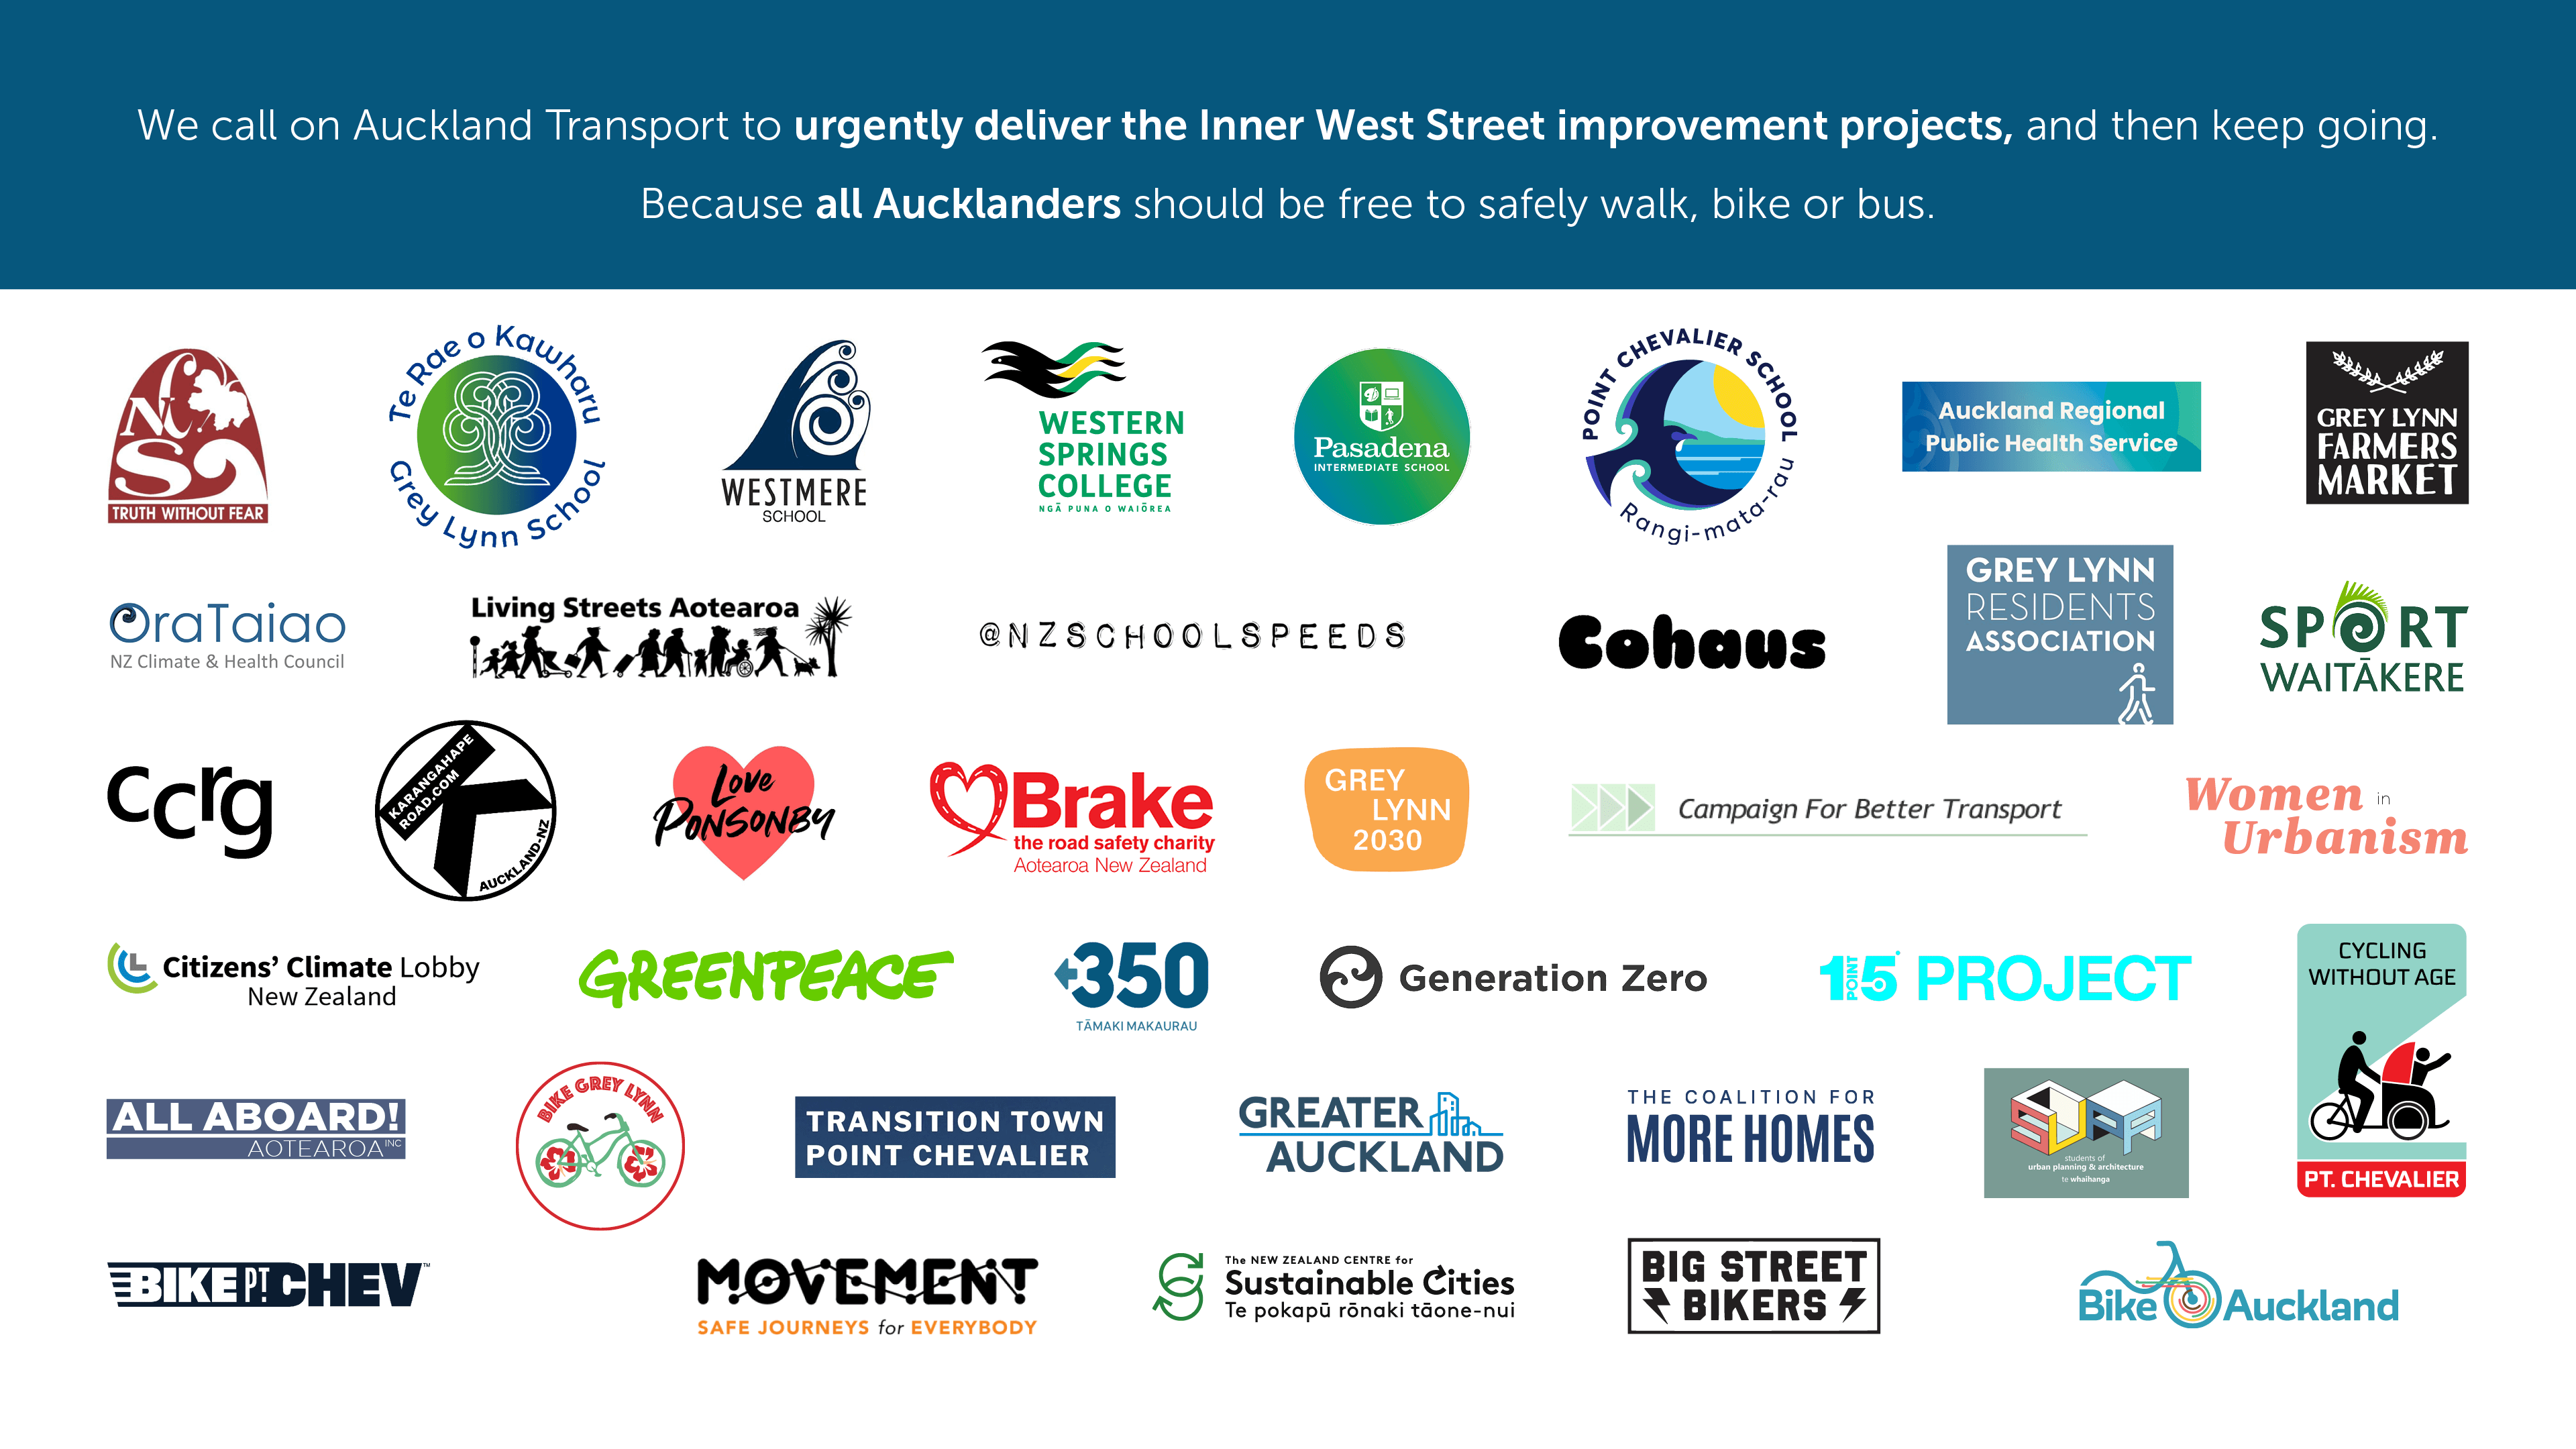 Image showing all the logos for the organisations that support the Inner West street improvement projects